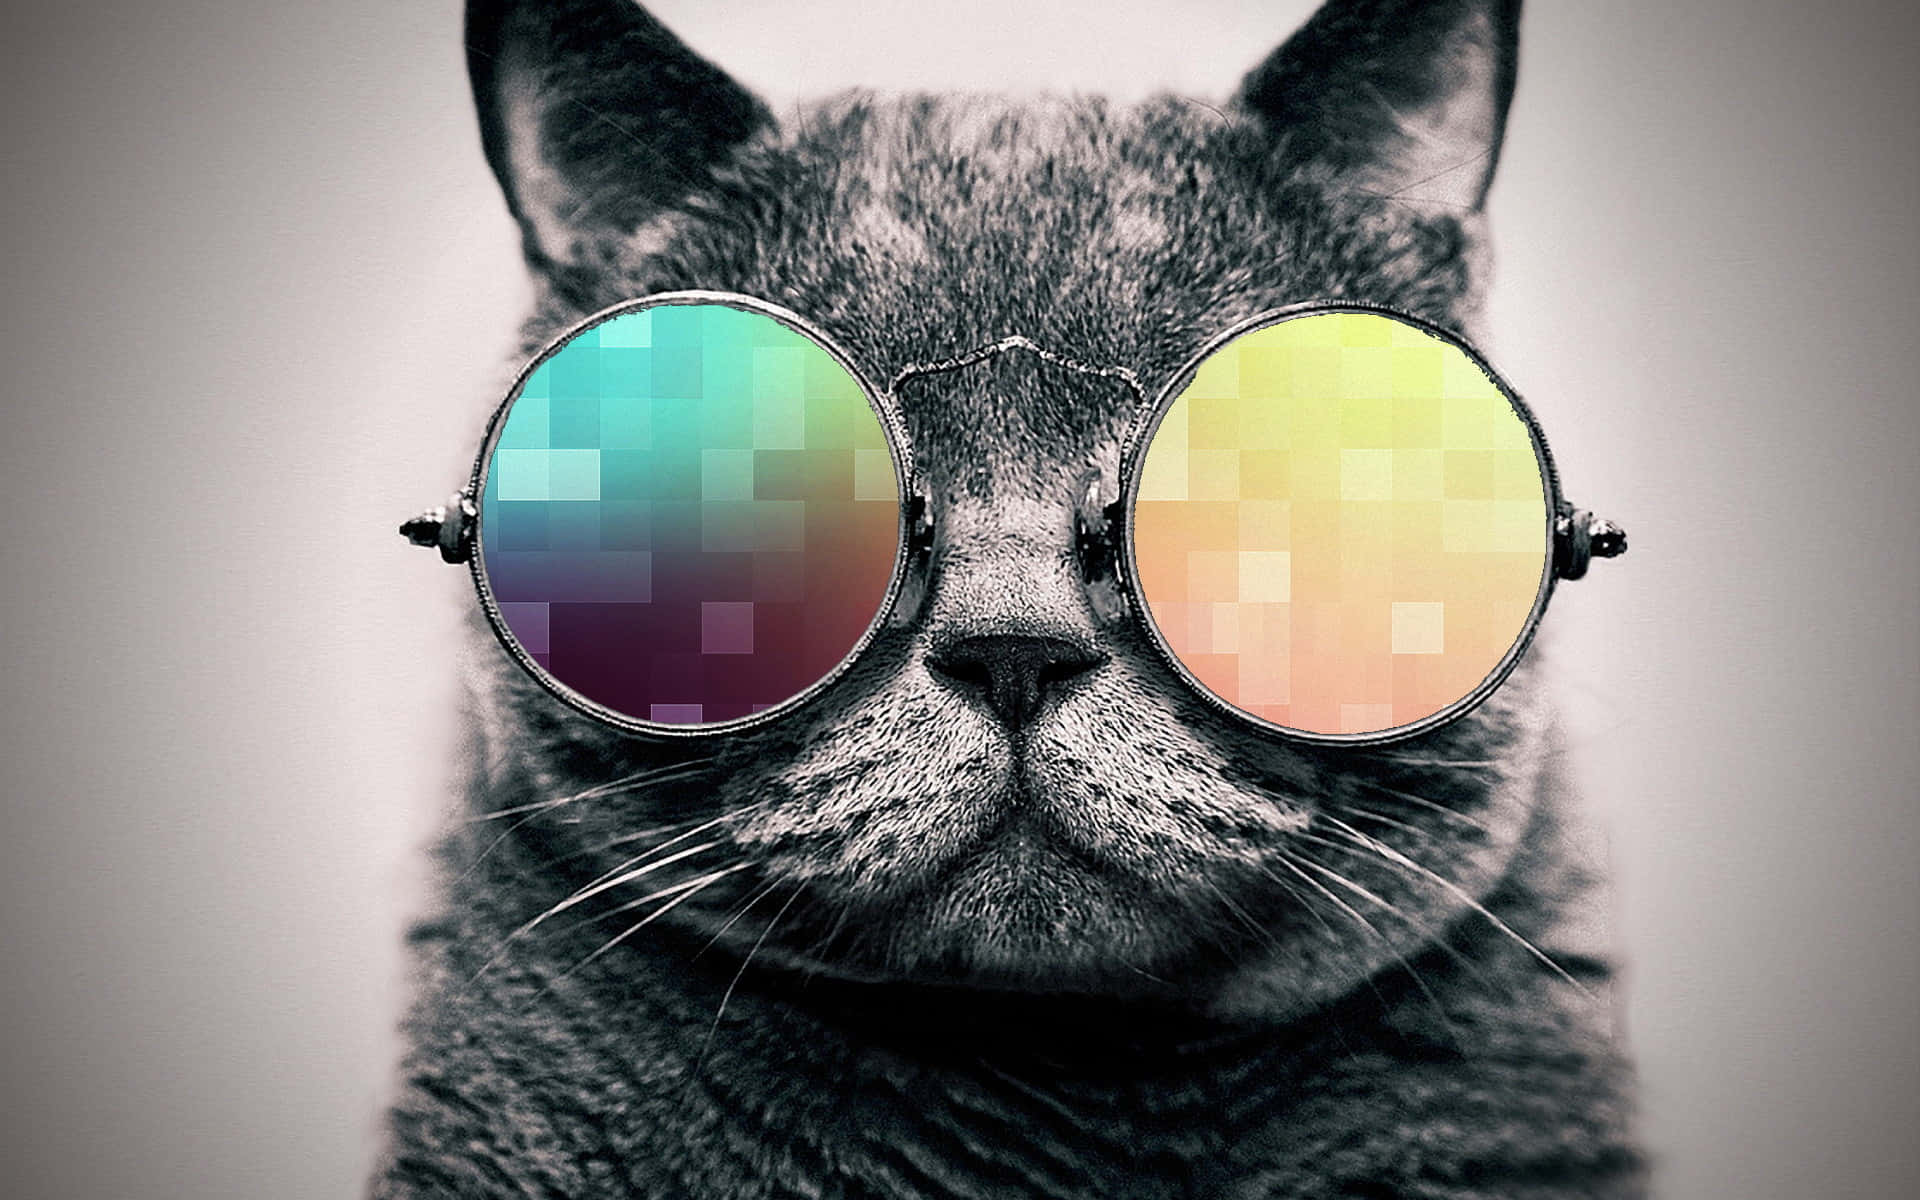 Chic Cat wearing shades and relaxing|